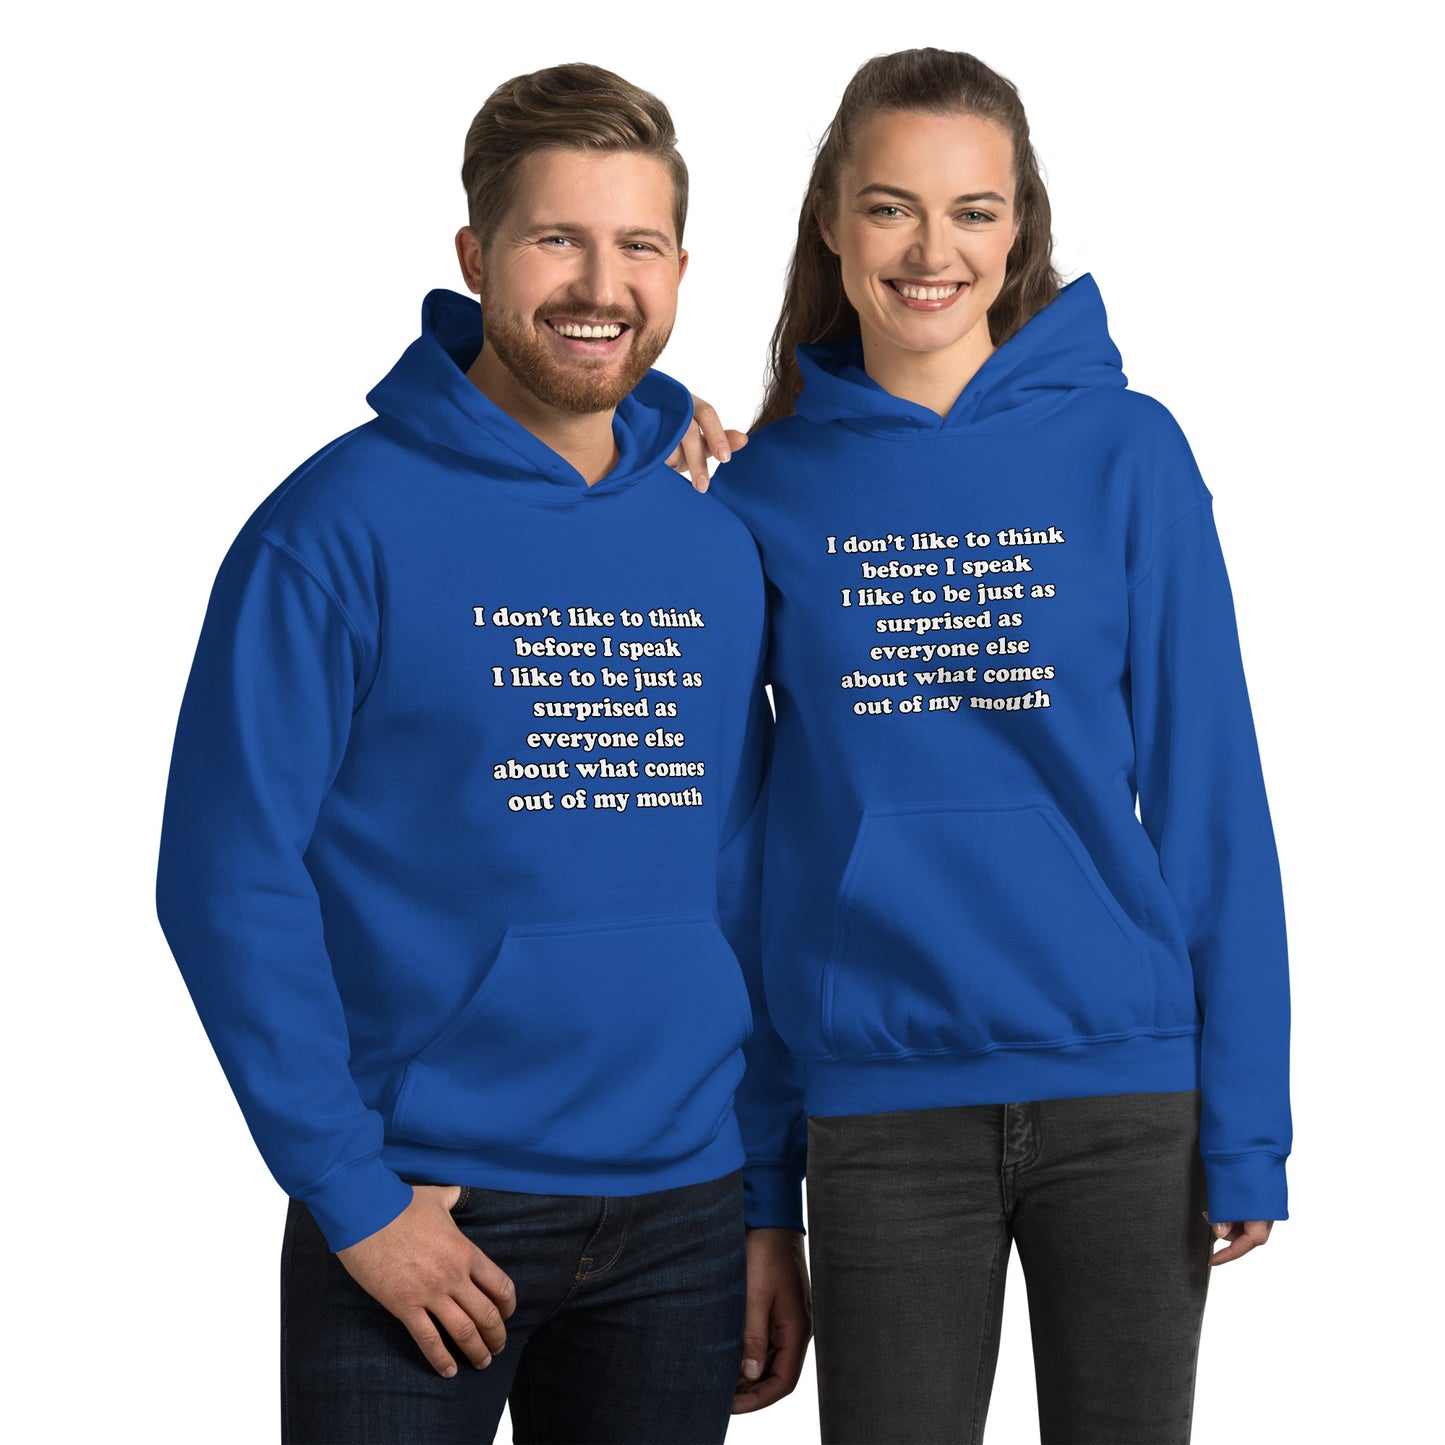 Man and woman with royal blue hoodie with text “I don't think before I speak Just as serprised as everyone about what comes out of my mouth"